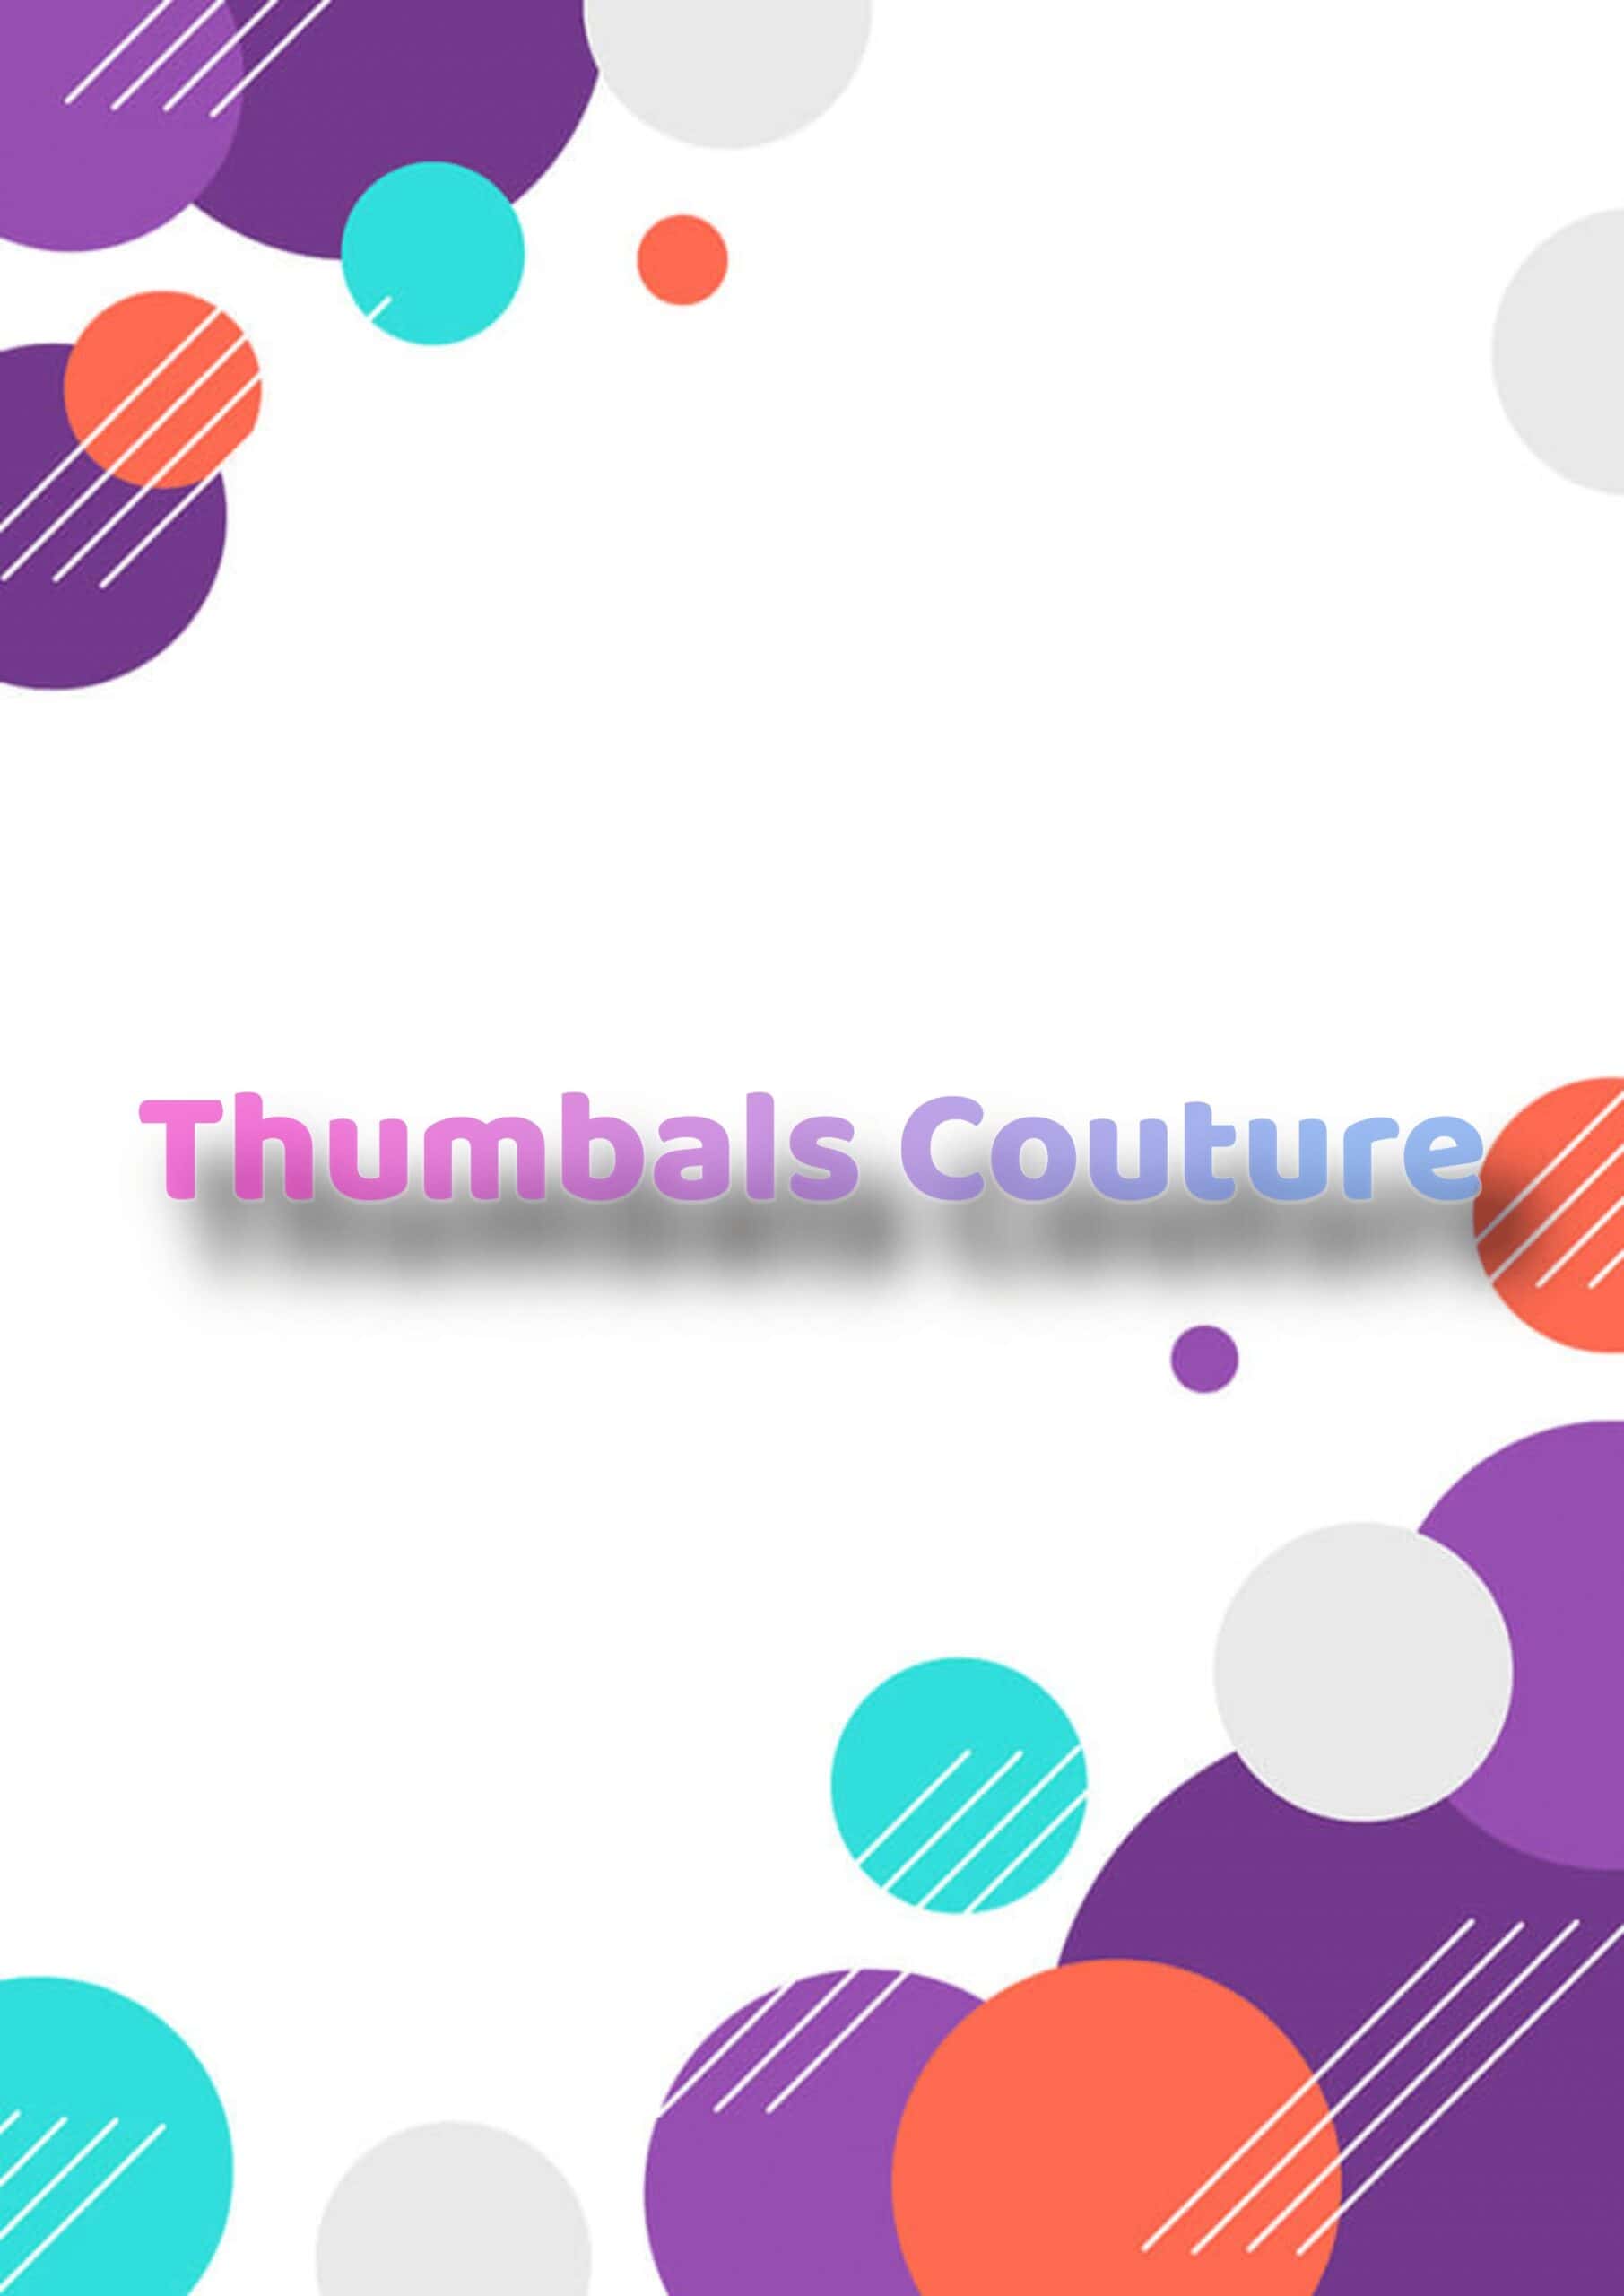 Thumbals_Couture